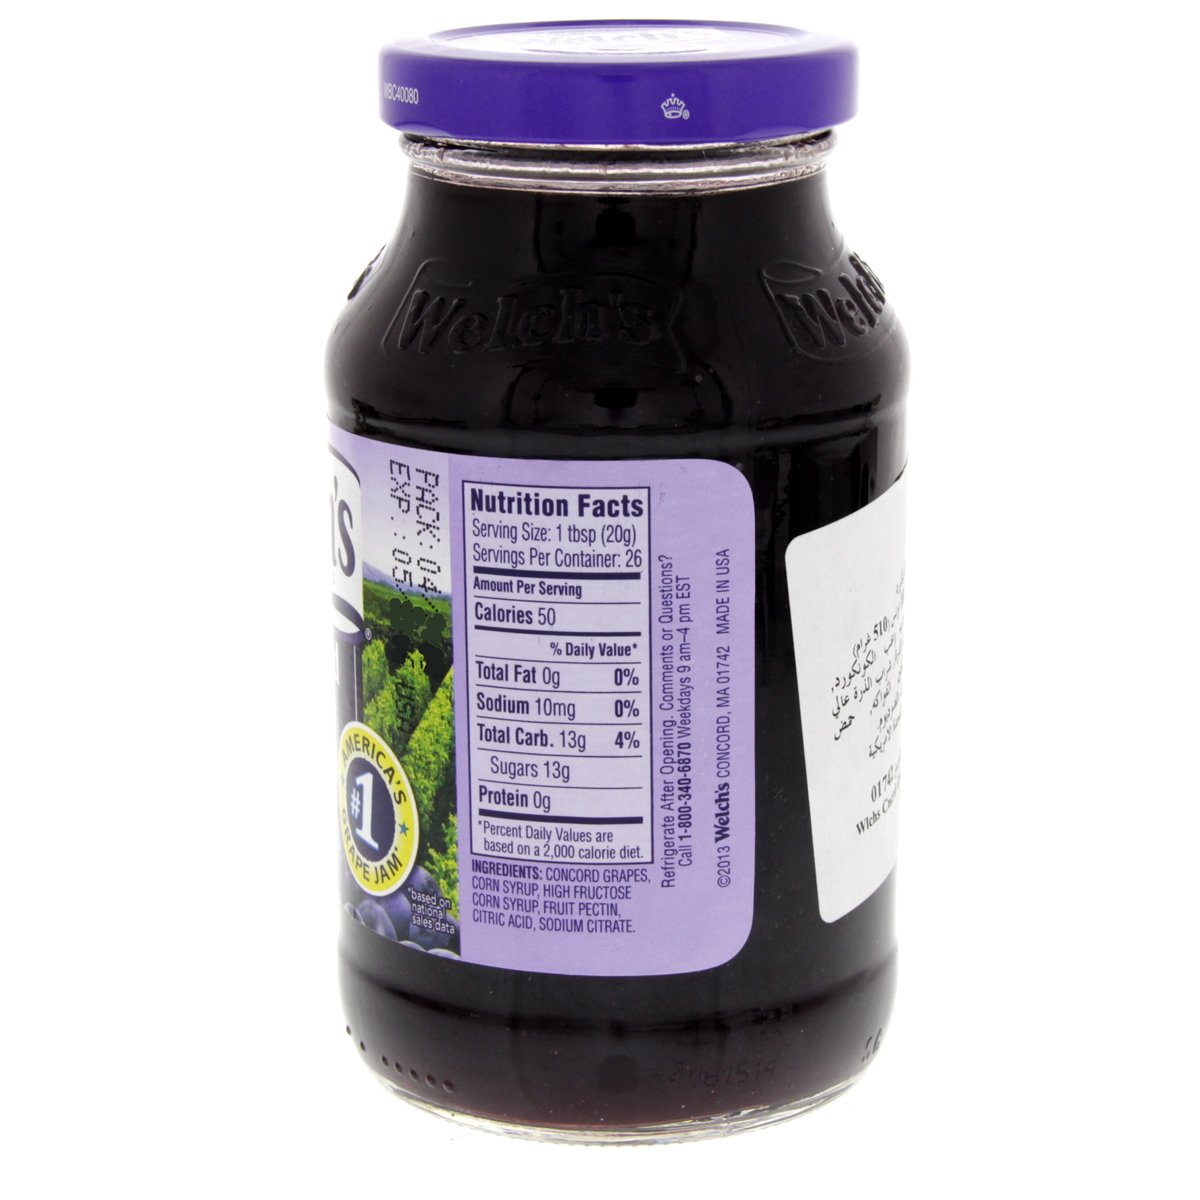 Welch's Concord Grape Jam 510 g